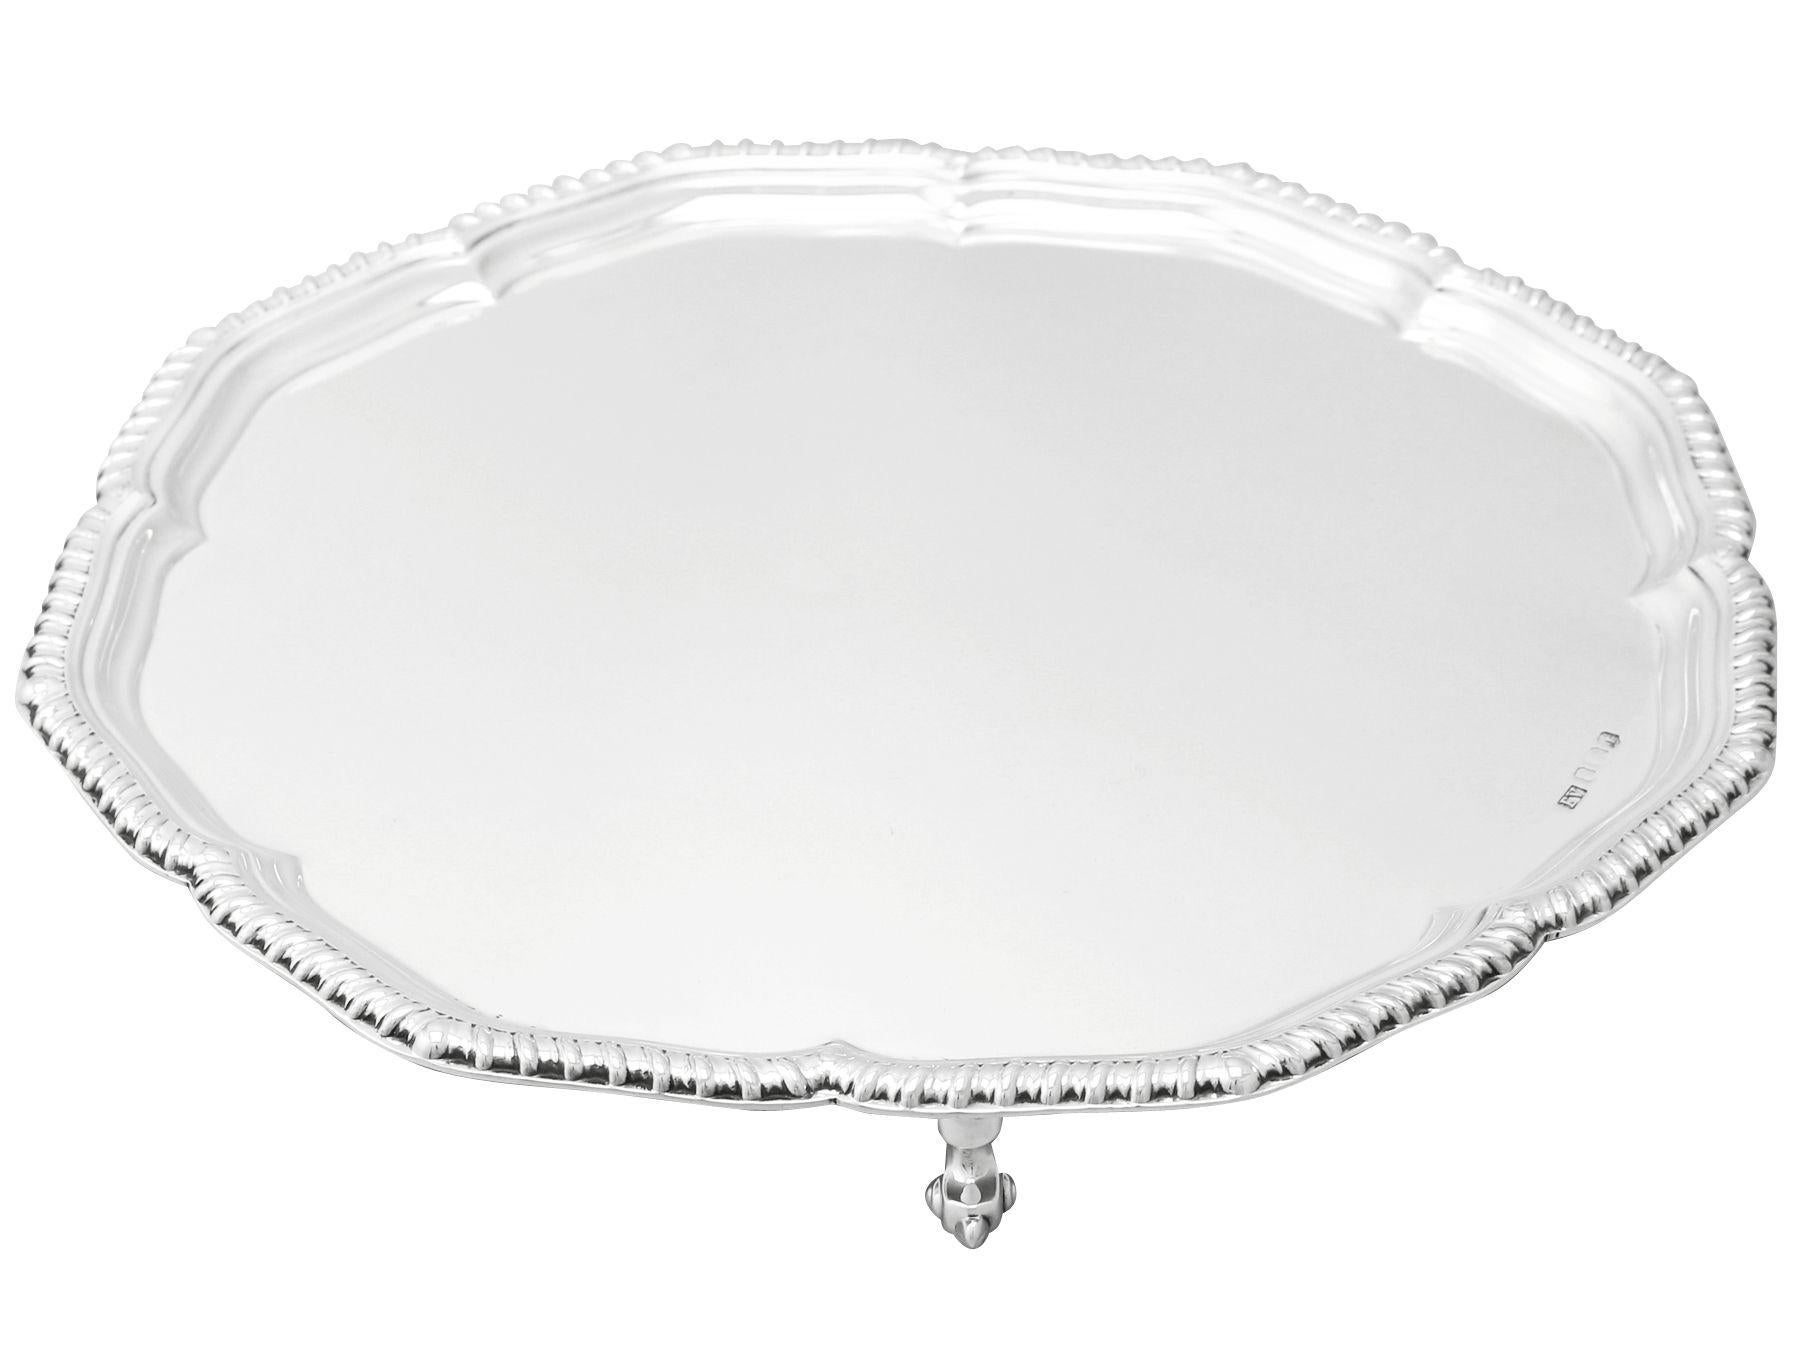 A fine and impressive vintage Elizabeth II English sterling silver salver; an addition to our silver dining collection.

This fine vintage Elizabeth II English sterling silver salver has a circular octofoil shaped form onto three feet.

The surface